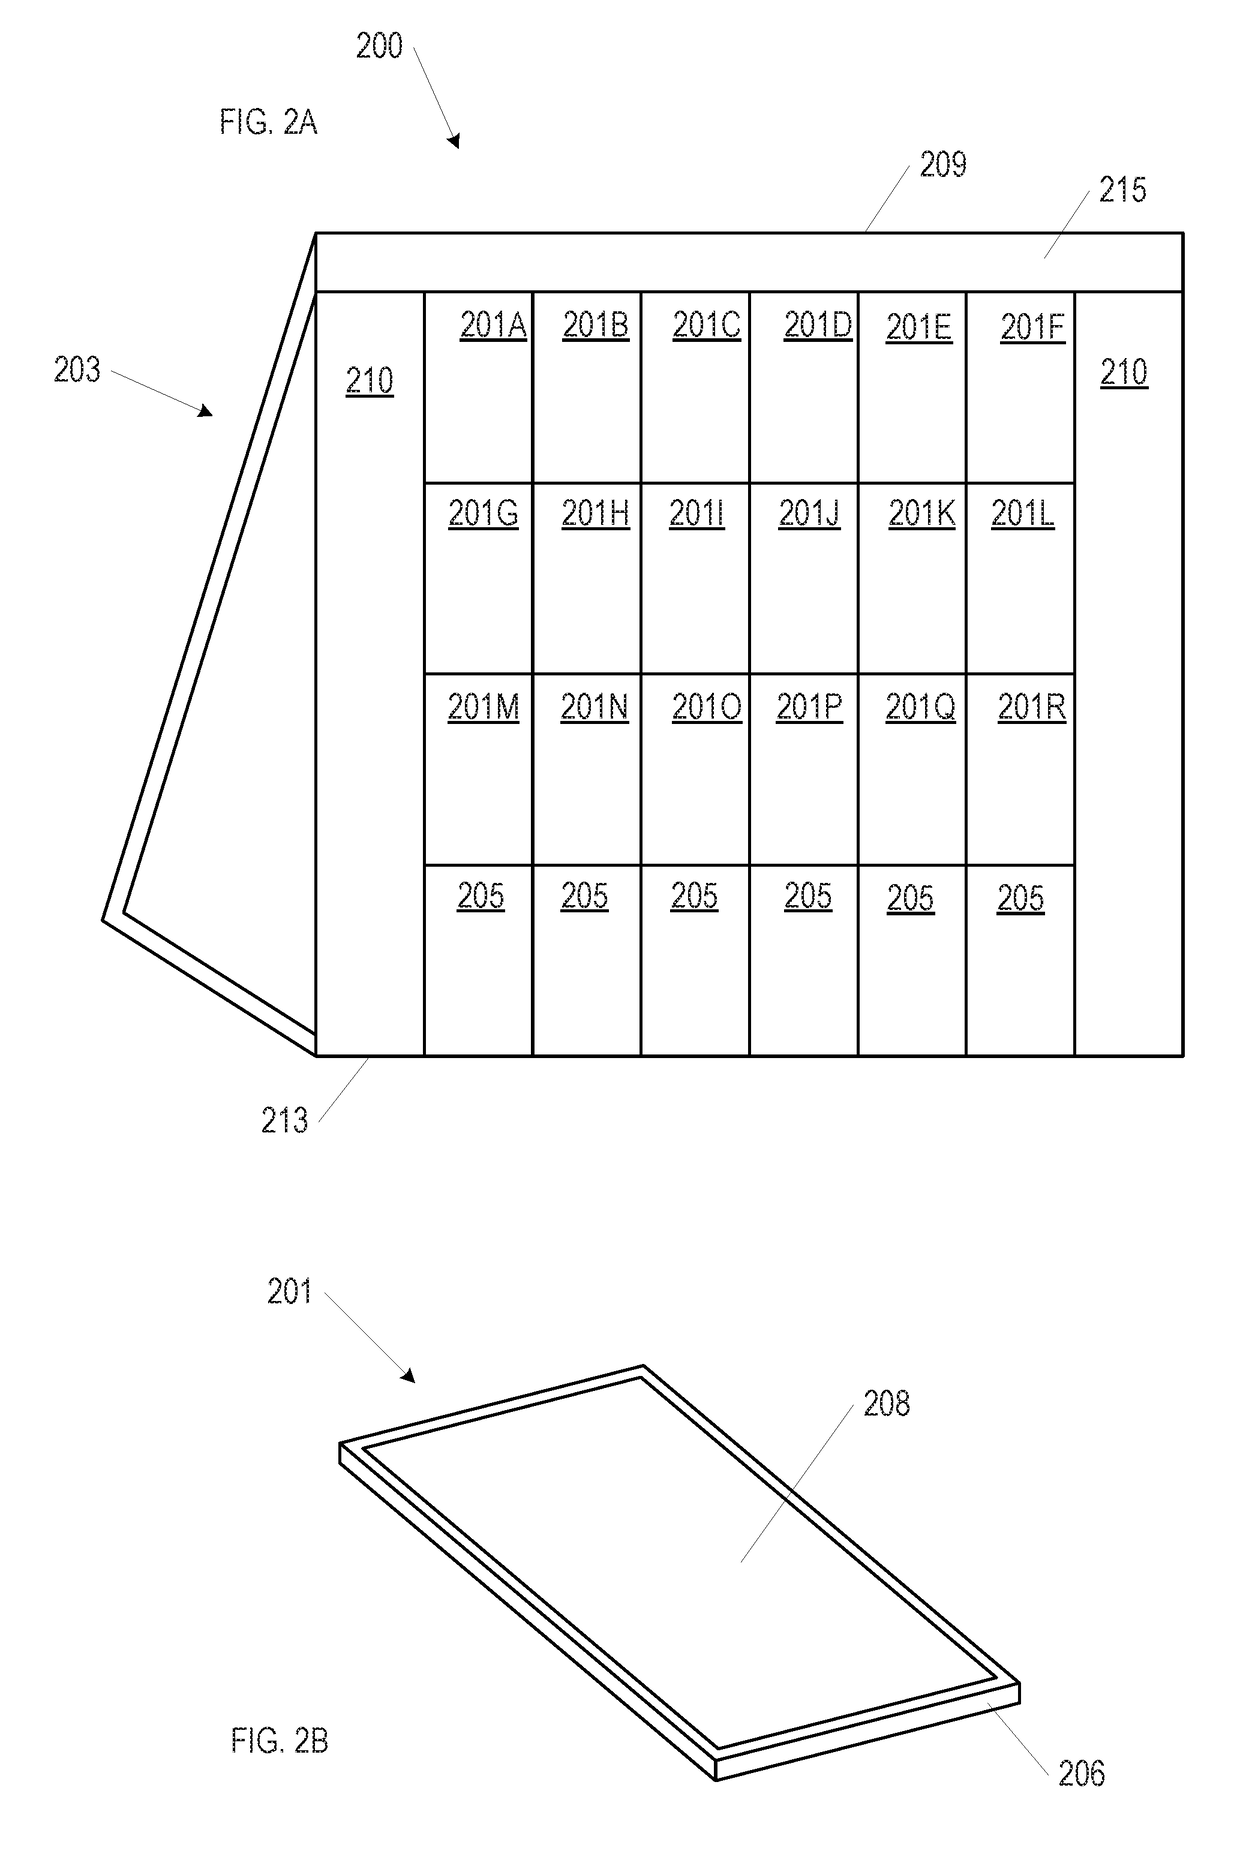 Building integrated photovoltaic roofing assemblies and associated systems and methods